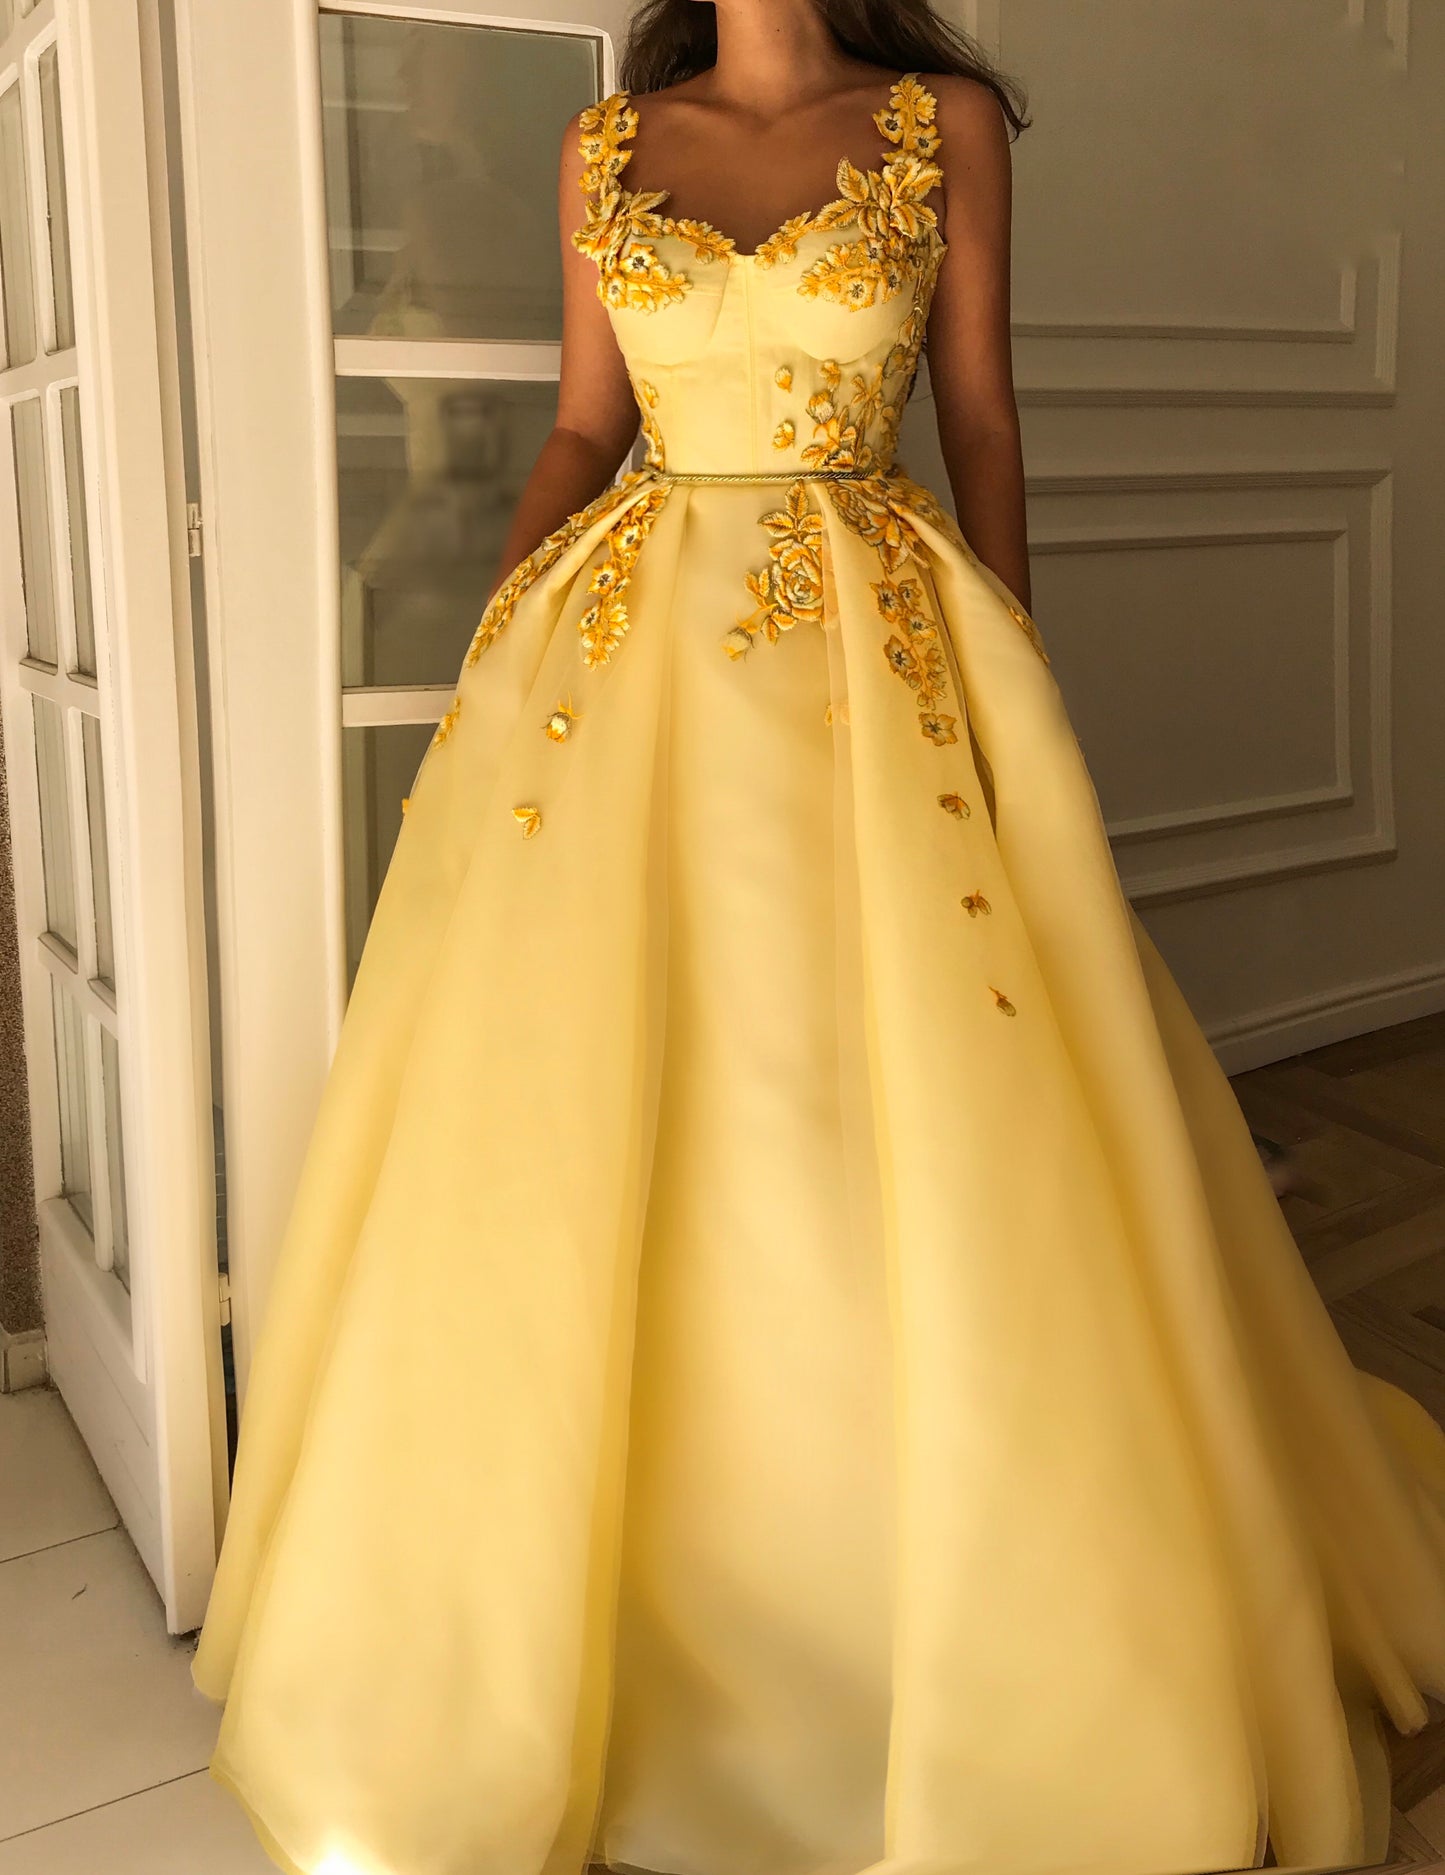 Yellow A-Line dress with straps and embroidery